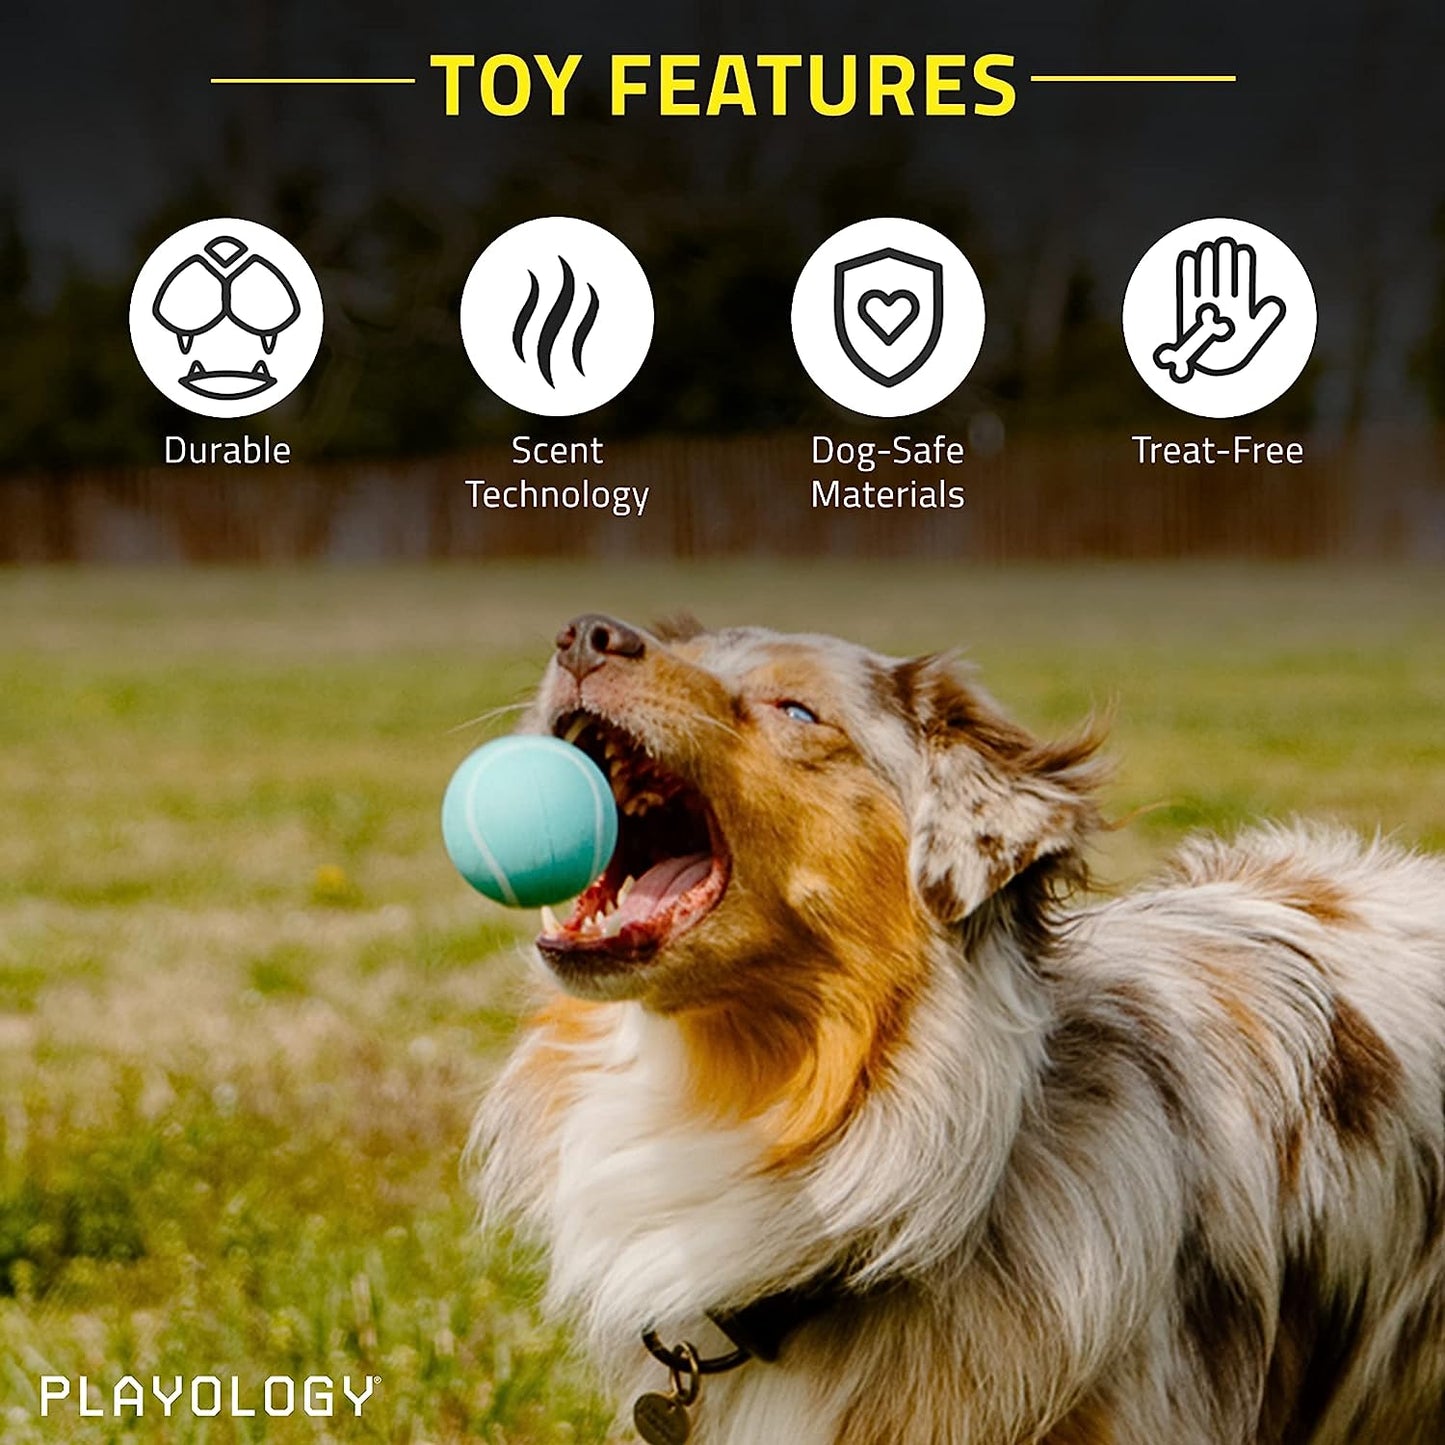 New Dog Balls for Medium and Large Dogs (10lbs & Up) - Dog Ball for Aggressive Chewers - Squeaky Toy, Engaging All-Natural Peanut Butter Scented - Non-Toxic Rubber Dog Ball Toys